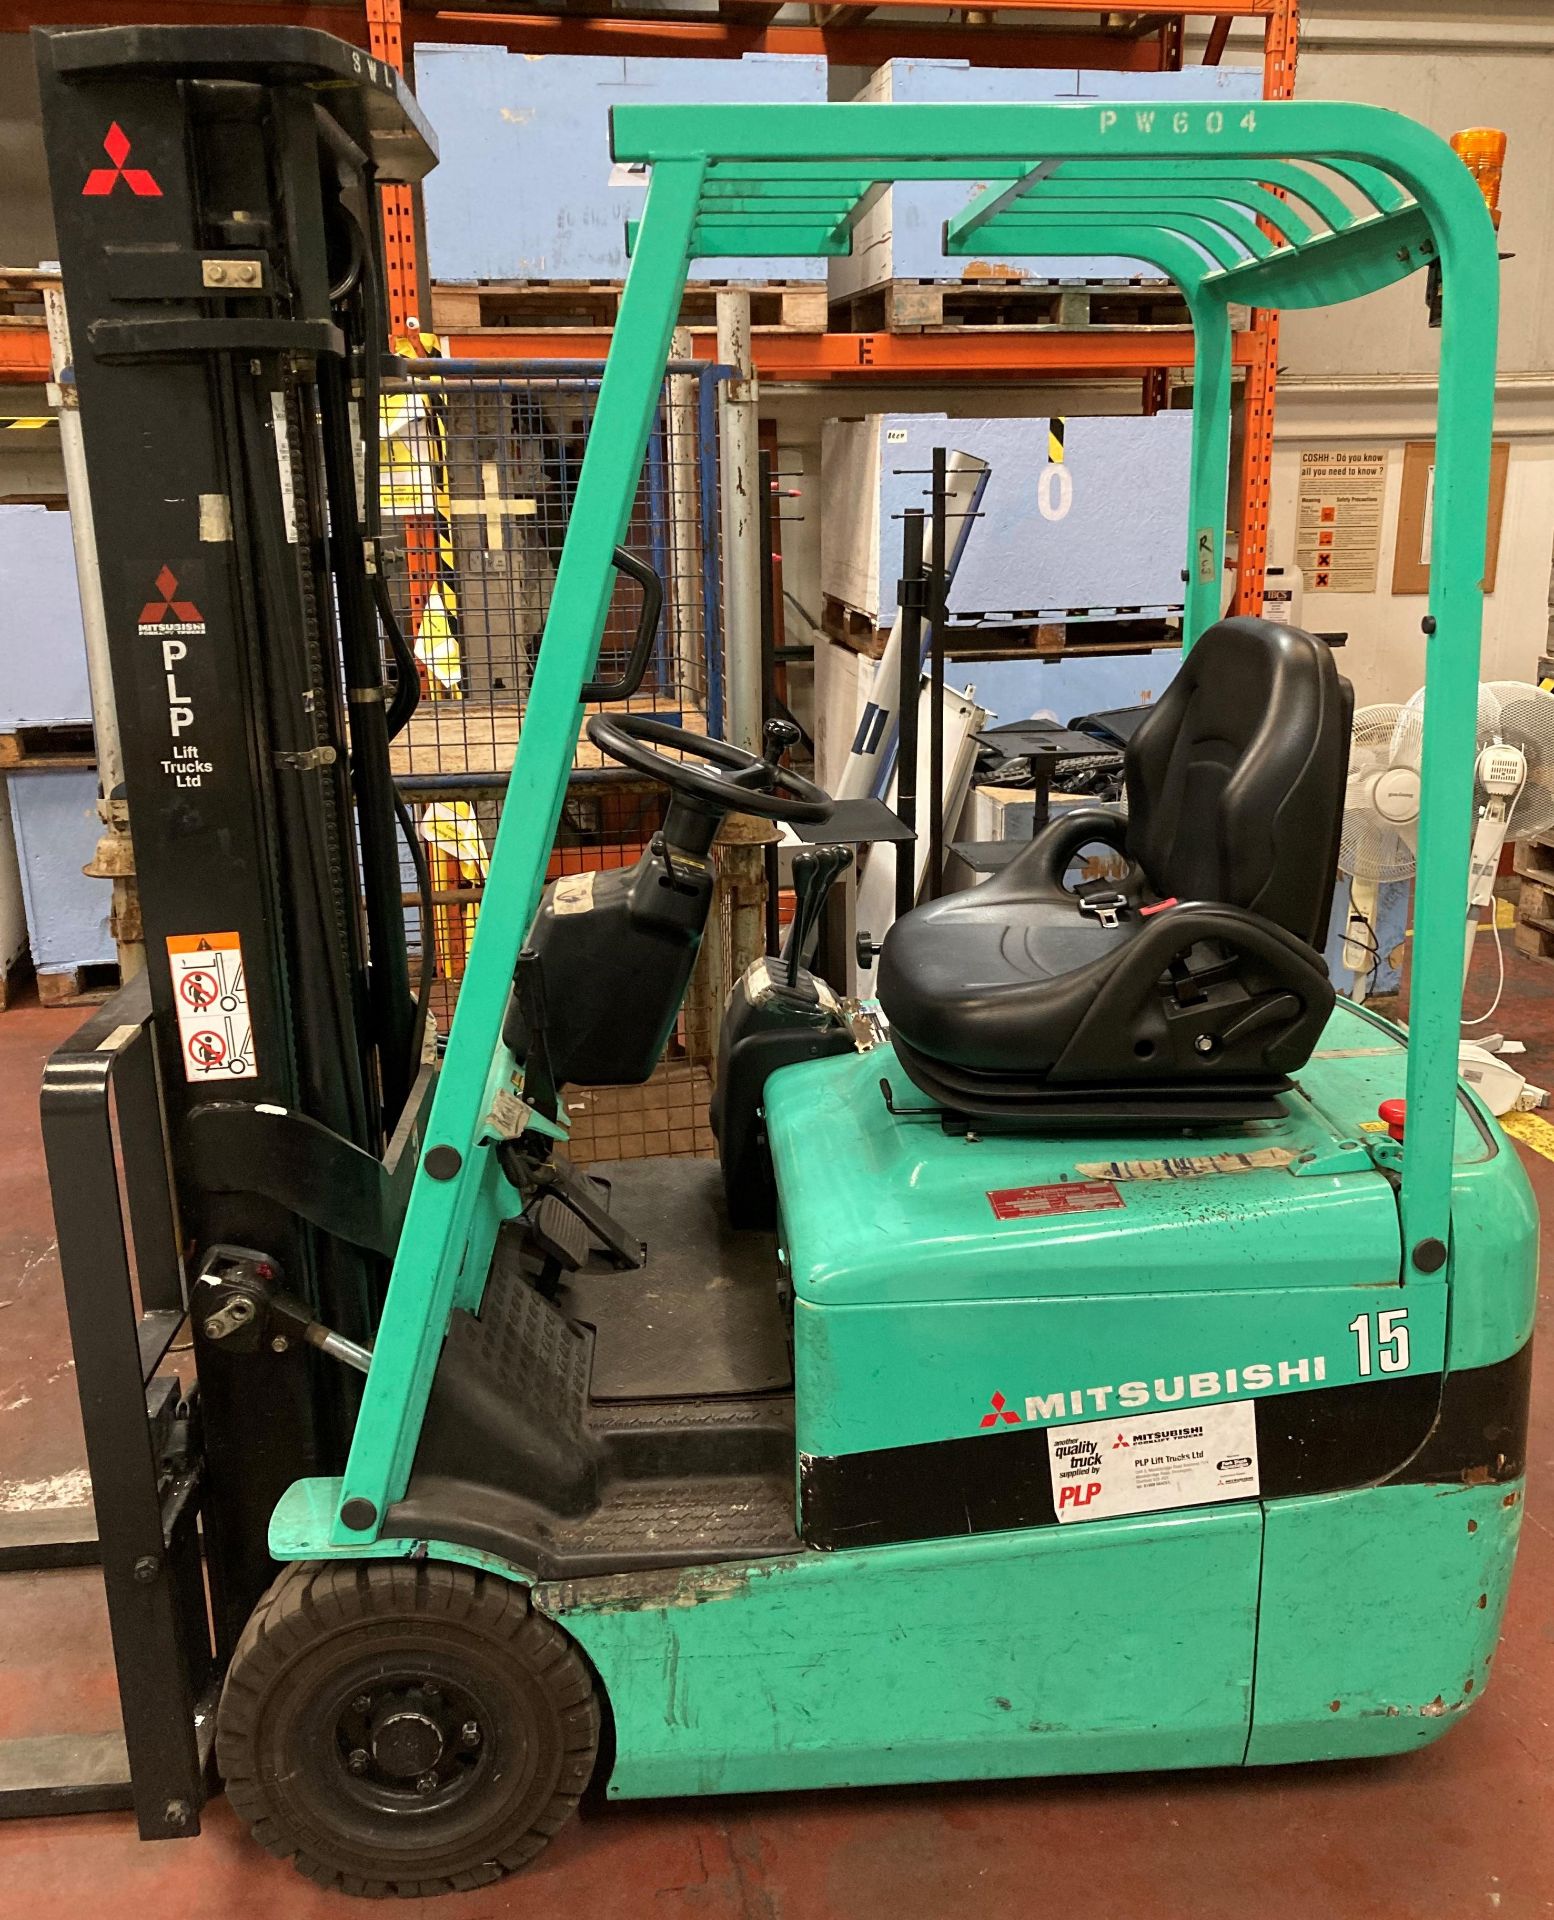 MITSUBISHI 15 ELECTRIC 3 WHEEL FORKTRUCK. On the instructions of: A retained client. - Image 2 of 8